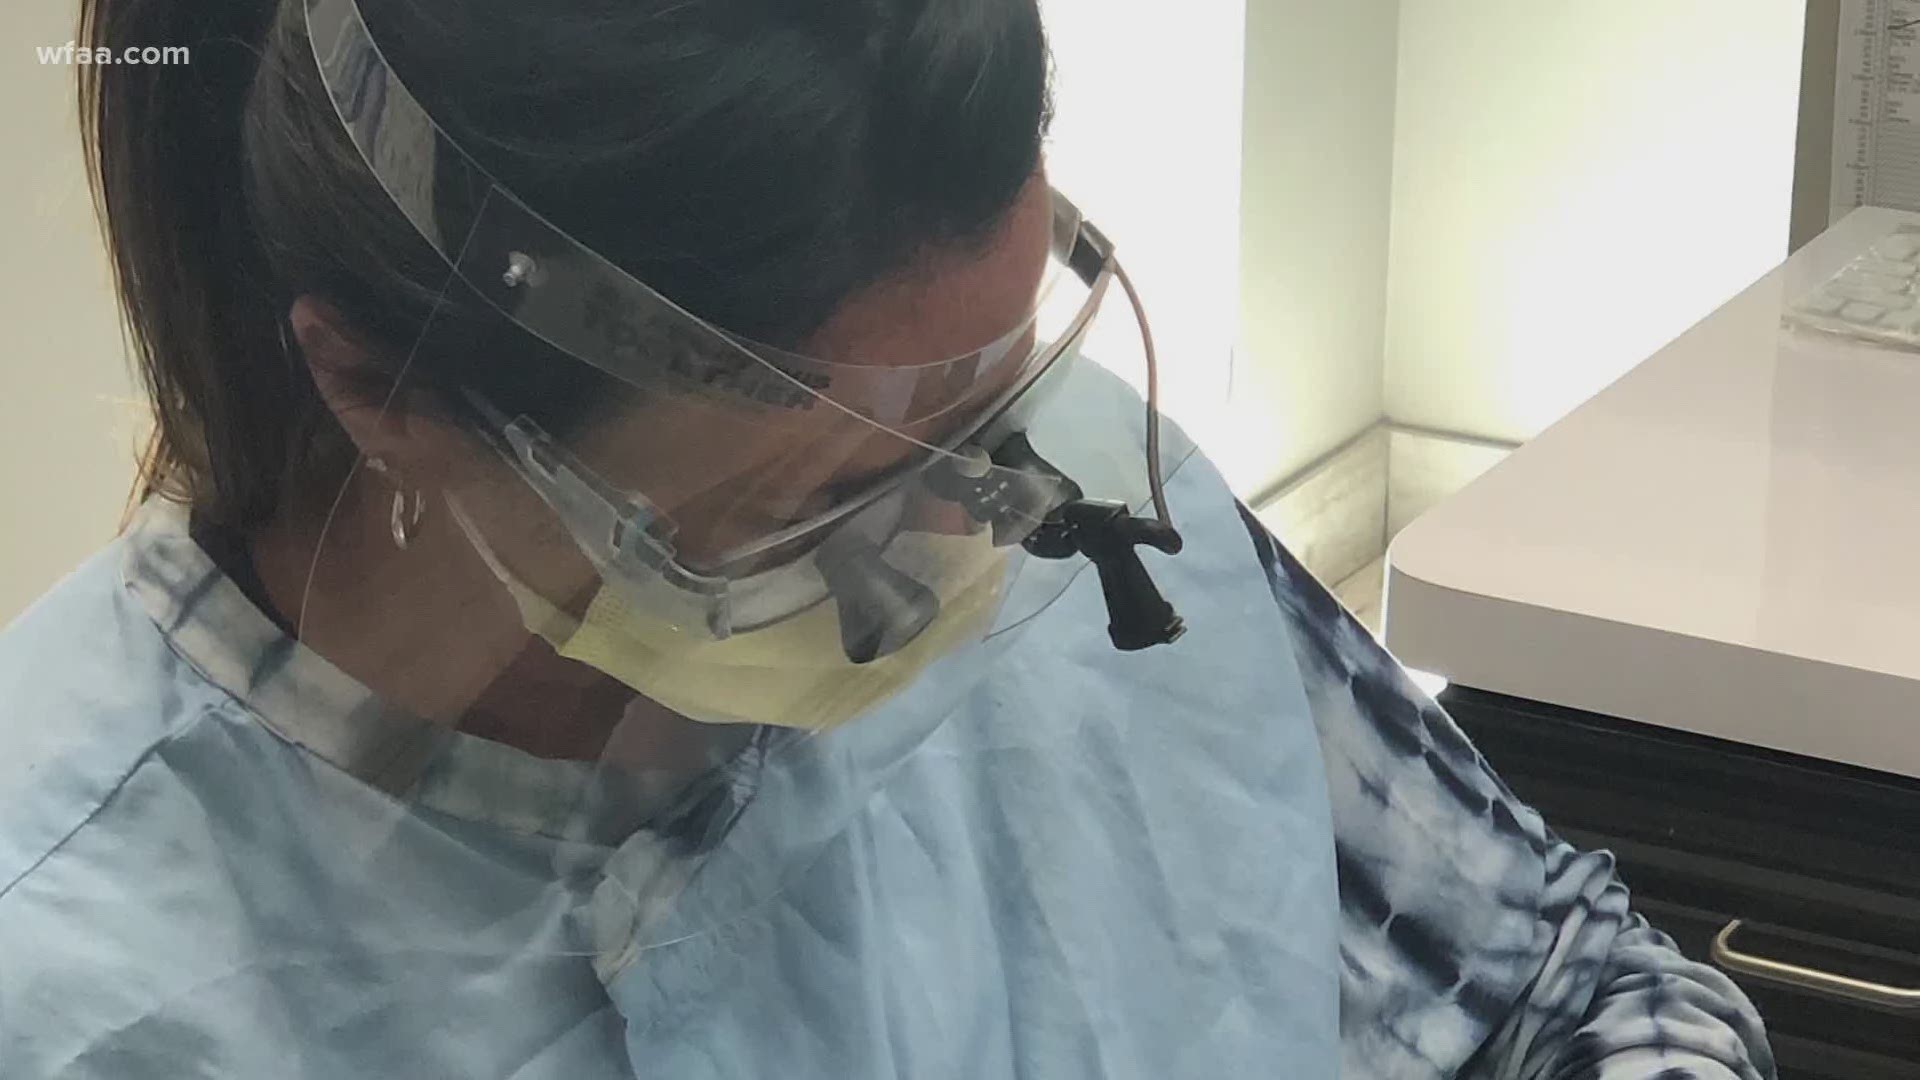 "We've been wearing PPE before we knew it was called PPE," one dentist said.